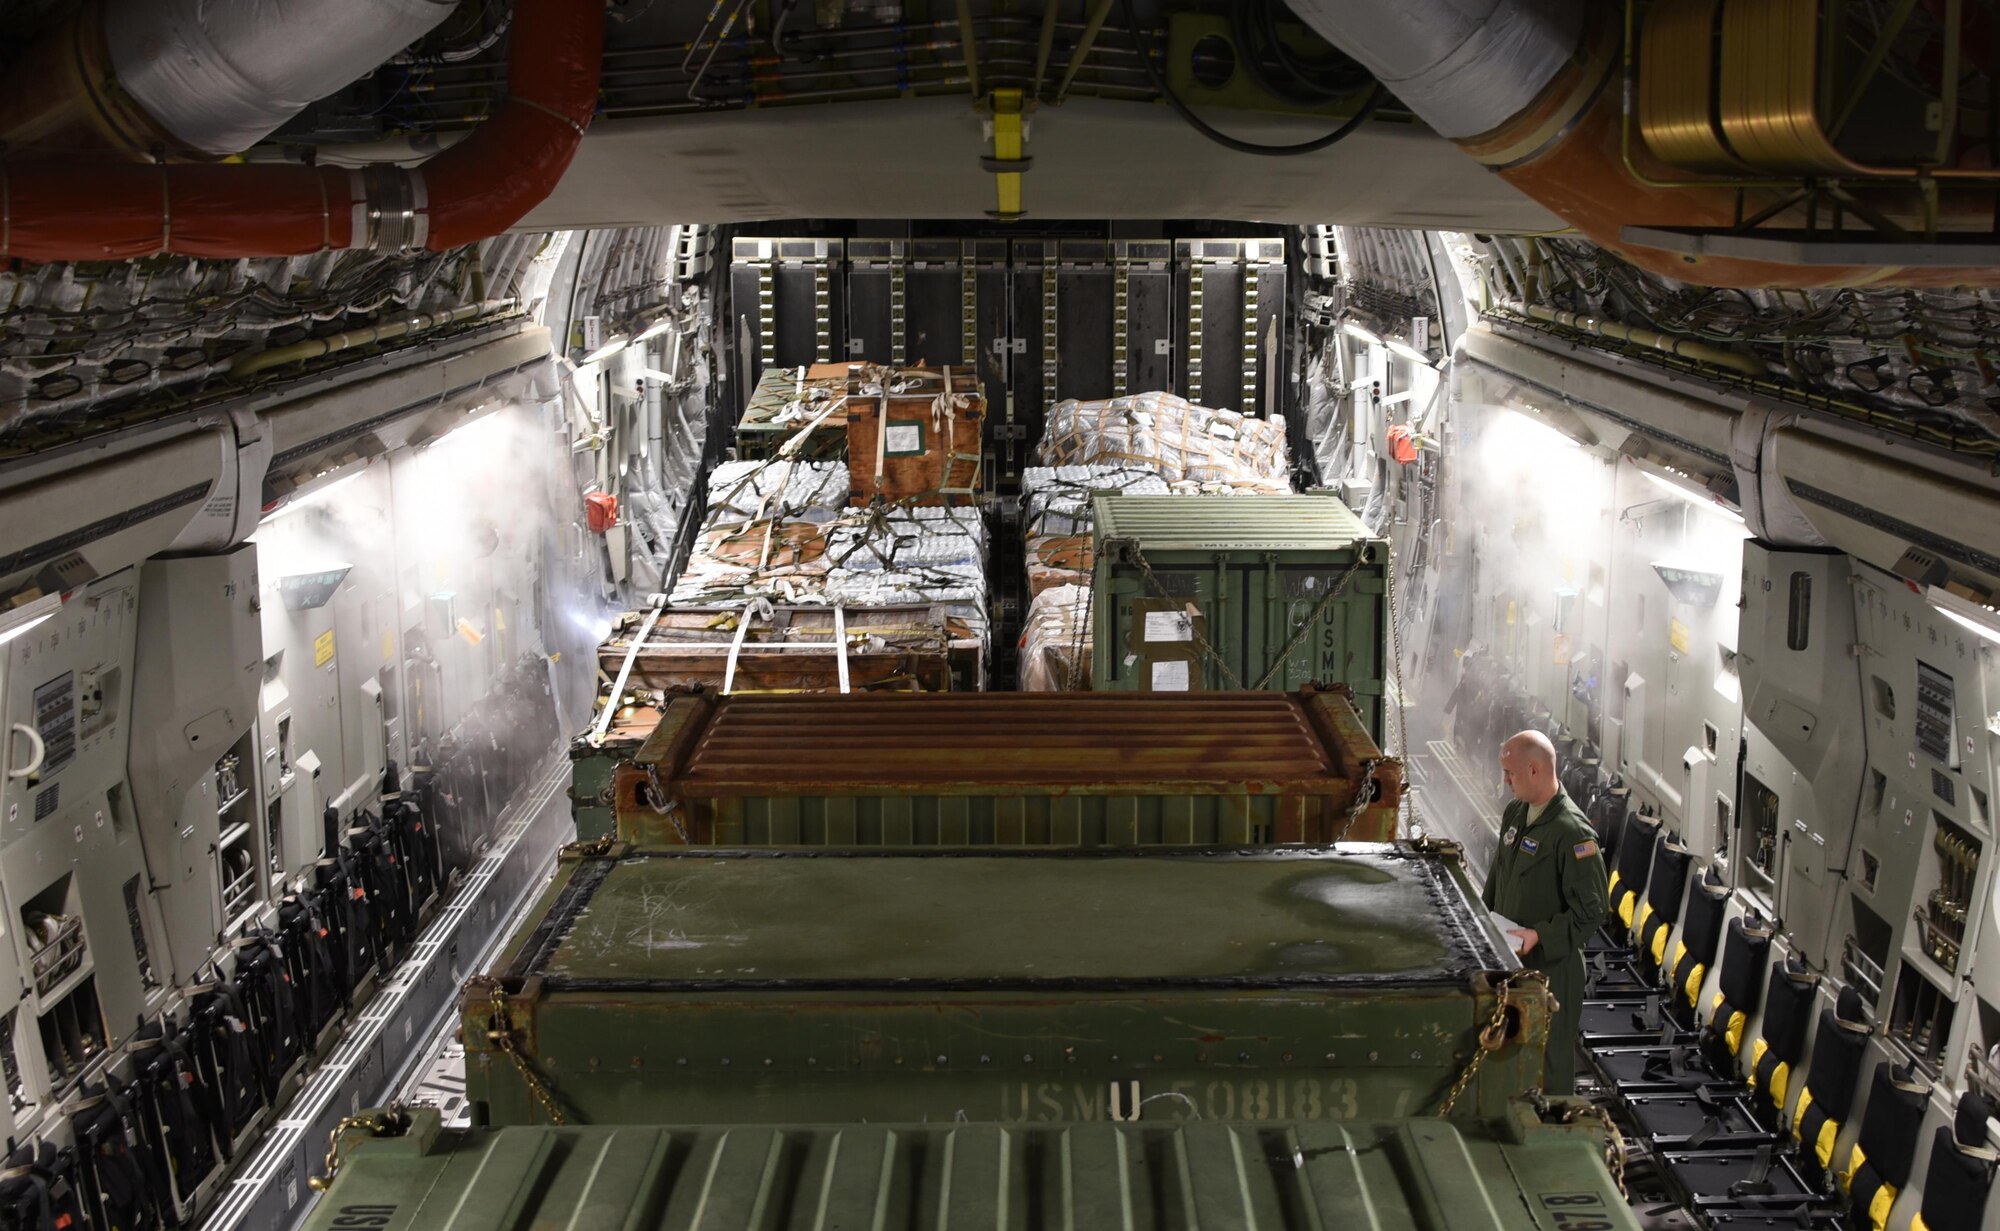 U.S. Air Force Staff Sgt. Daniel Matthews, 3rd Airlift Squadron loadmaster, inspects cargo that was loaded on a C-17 Globemaster III cargo aircraft at Soto Cano Air Base, Honduras, before taking off for Port-au-Prince, Haiti where the equipment will be used to support Joint Task Force Matthew hurricane relief operations, Oct. 8, 2016. U.S. Southern Command requested heavy airlift to transport critical equipment packages needed to sustain helicopter flight operations in Haiti being conducted by Special Purpose Marine Air-Ground Task Force-Southern Command and Joint Task Force-Bravo’s 1st Battalion, 228th Aviation Regiment using two CH-53E Super Stallions, three CH-47 Chinooks, and two UH-60L and two HH-60L Black Hawks in support of the U.S. Agency for International Development-led mission to alleviate human suffering and bolster Haitian disaster response capabilities. (U.S. Air Force photo by Capt. David Liapis)